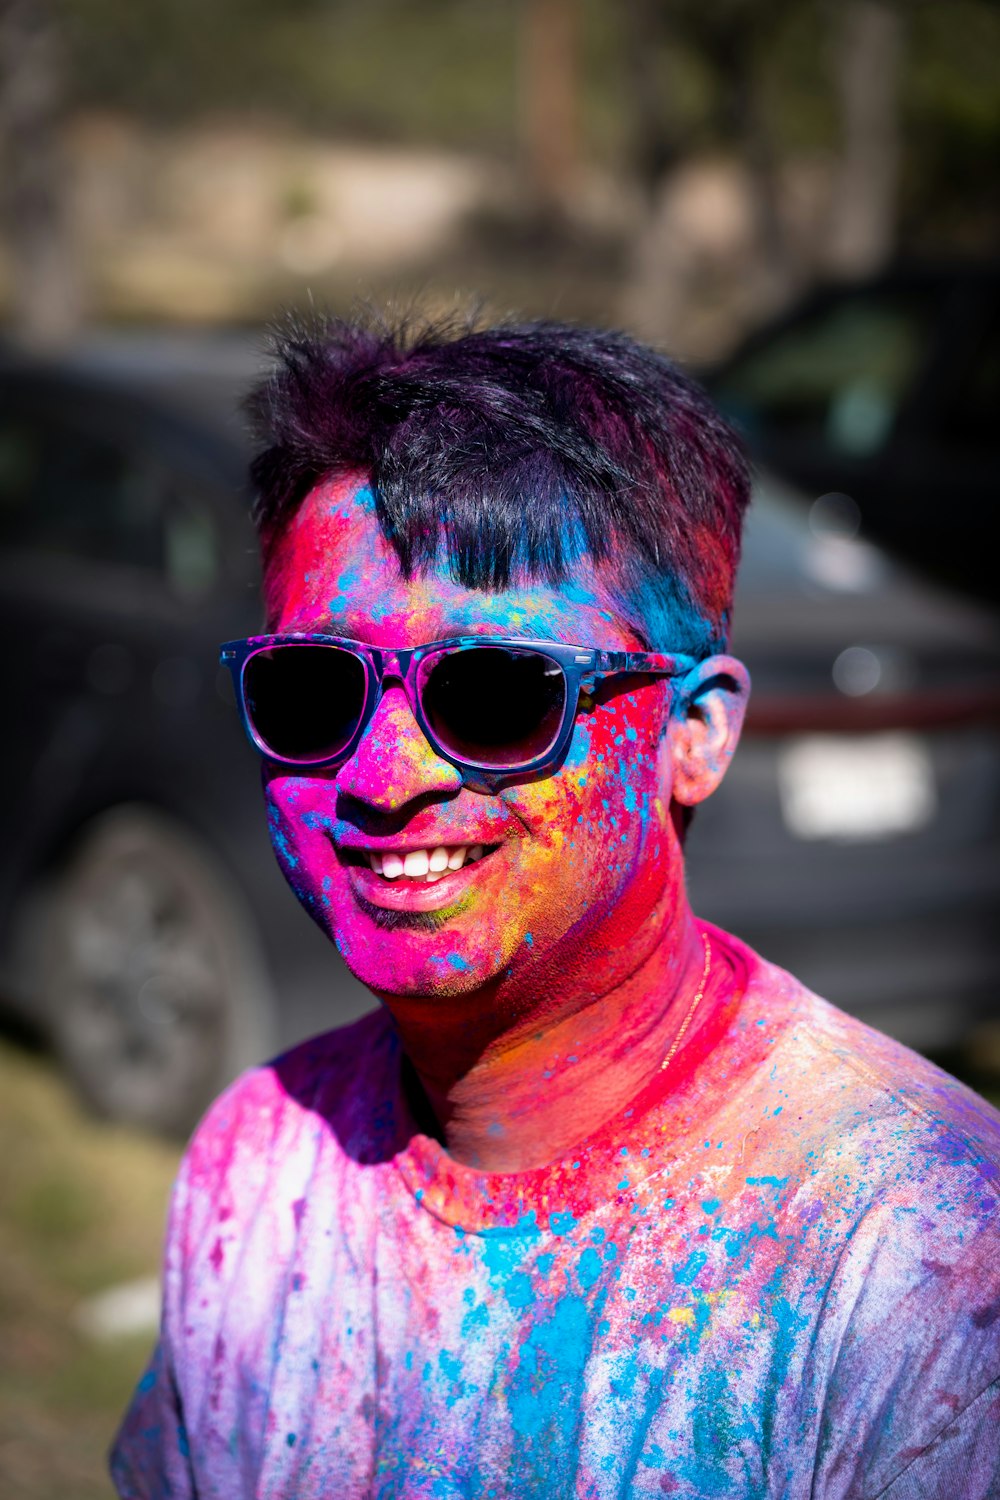 a man wearing sunglasses and a shirt covered in colored powder